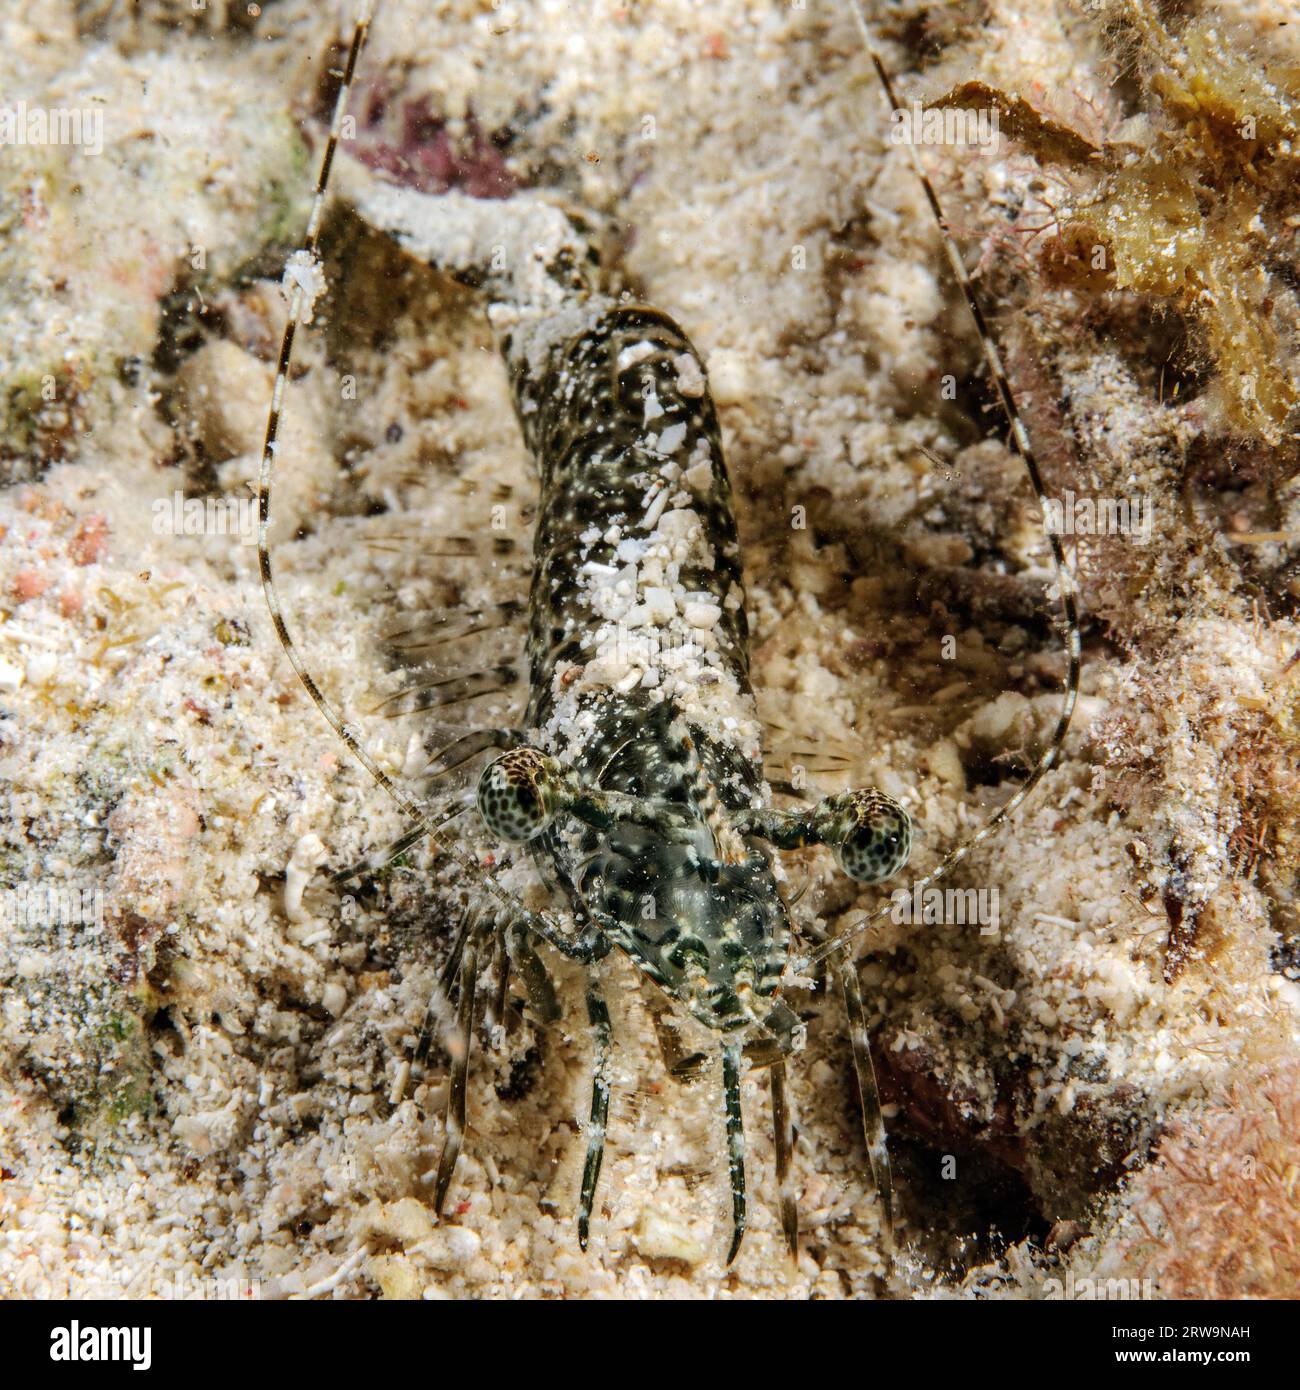 Marbled shrimp (Saron marmoratus) camouflages itself with sand lurks for prey on seabed, Indo-Pacific, Philippine Sea, Cebu, Visayas, Philippines Stock Photo